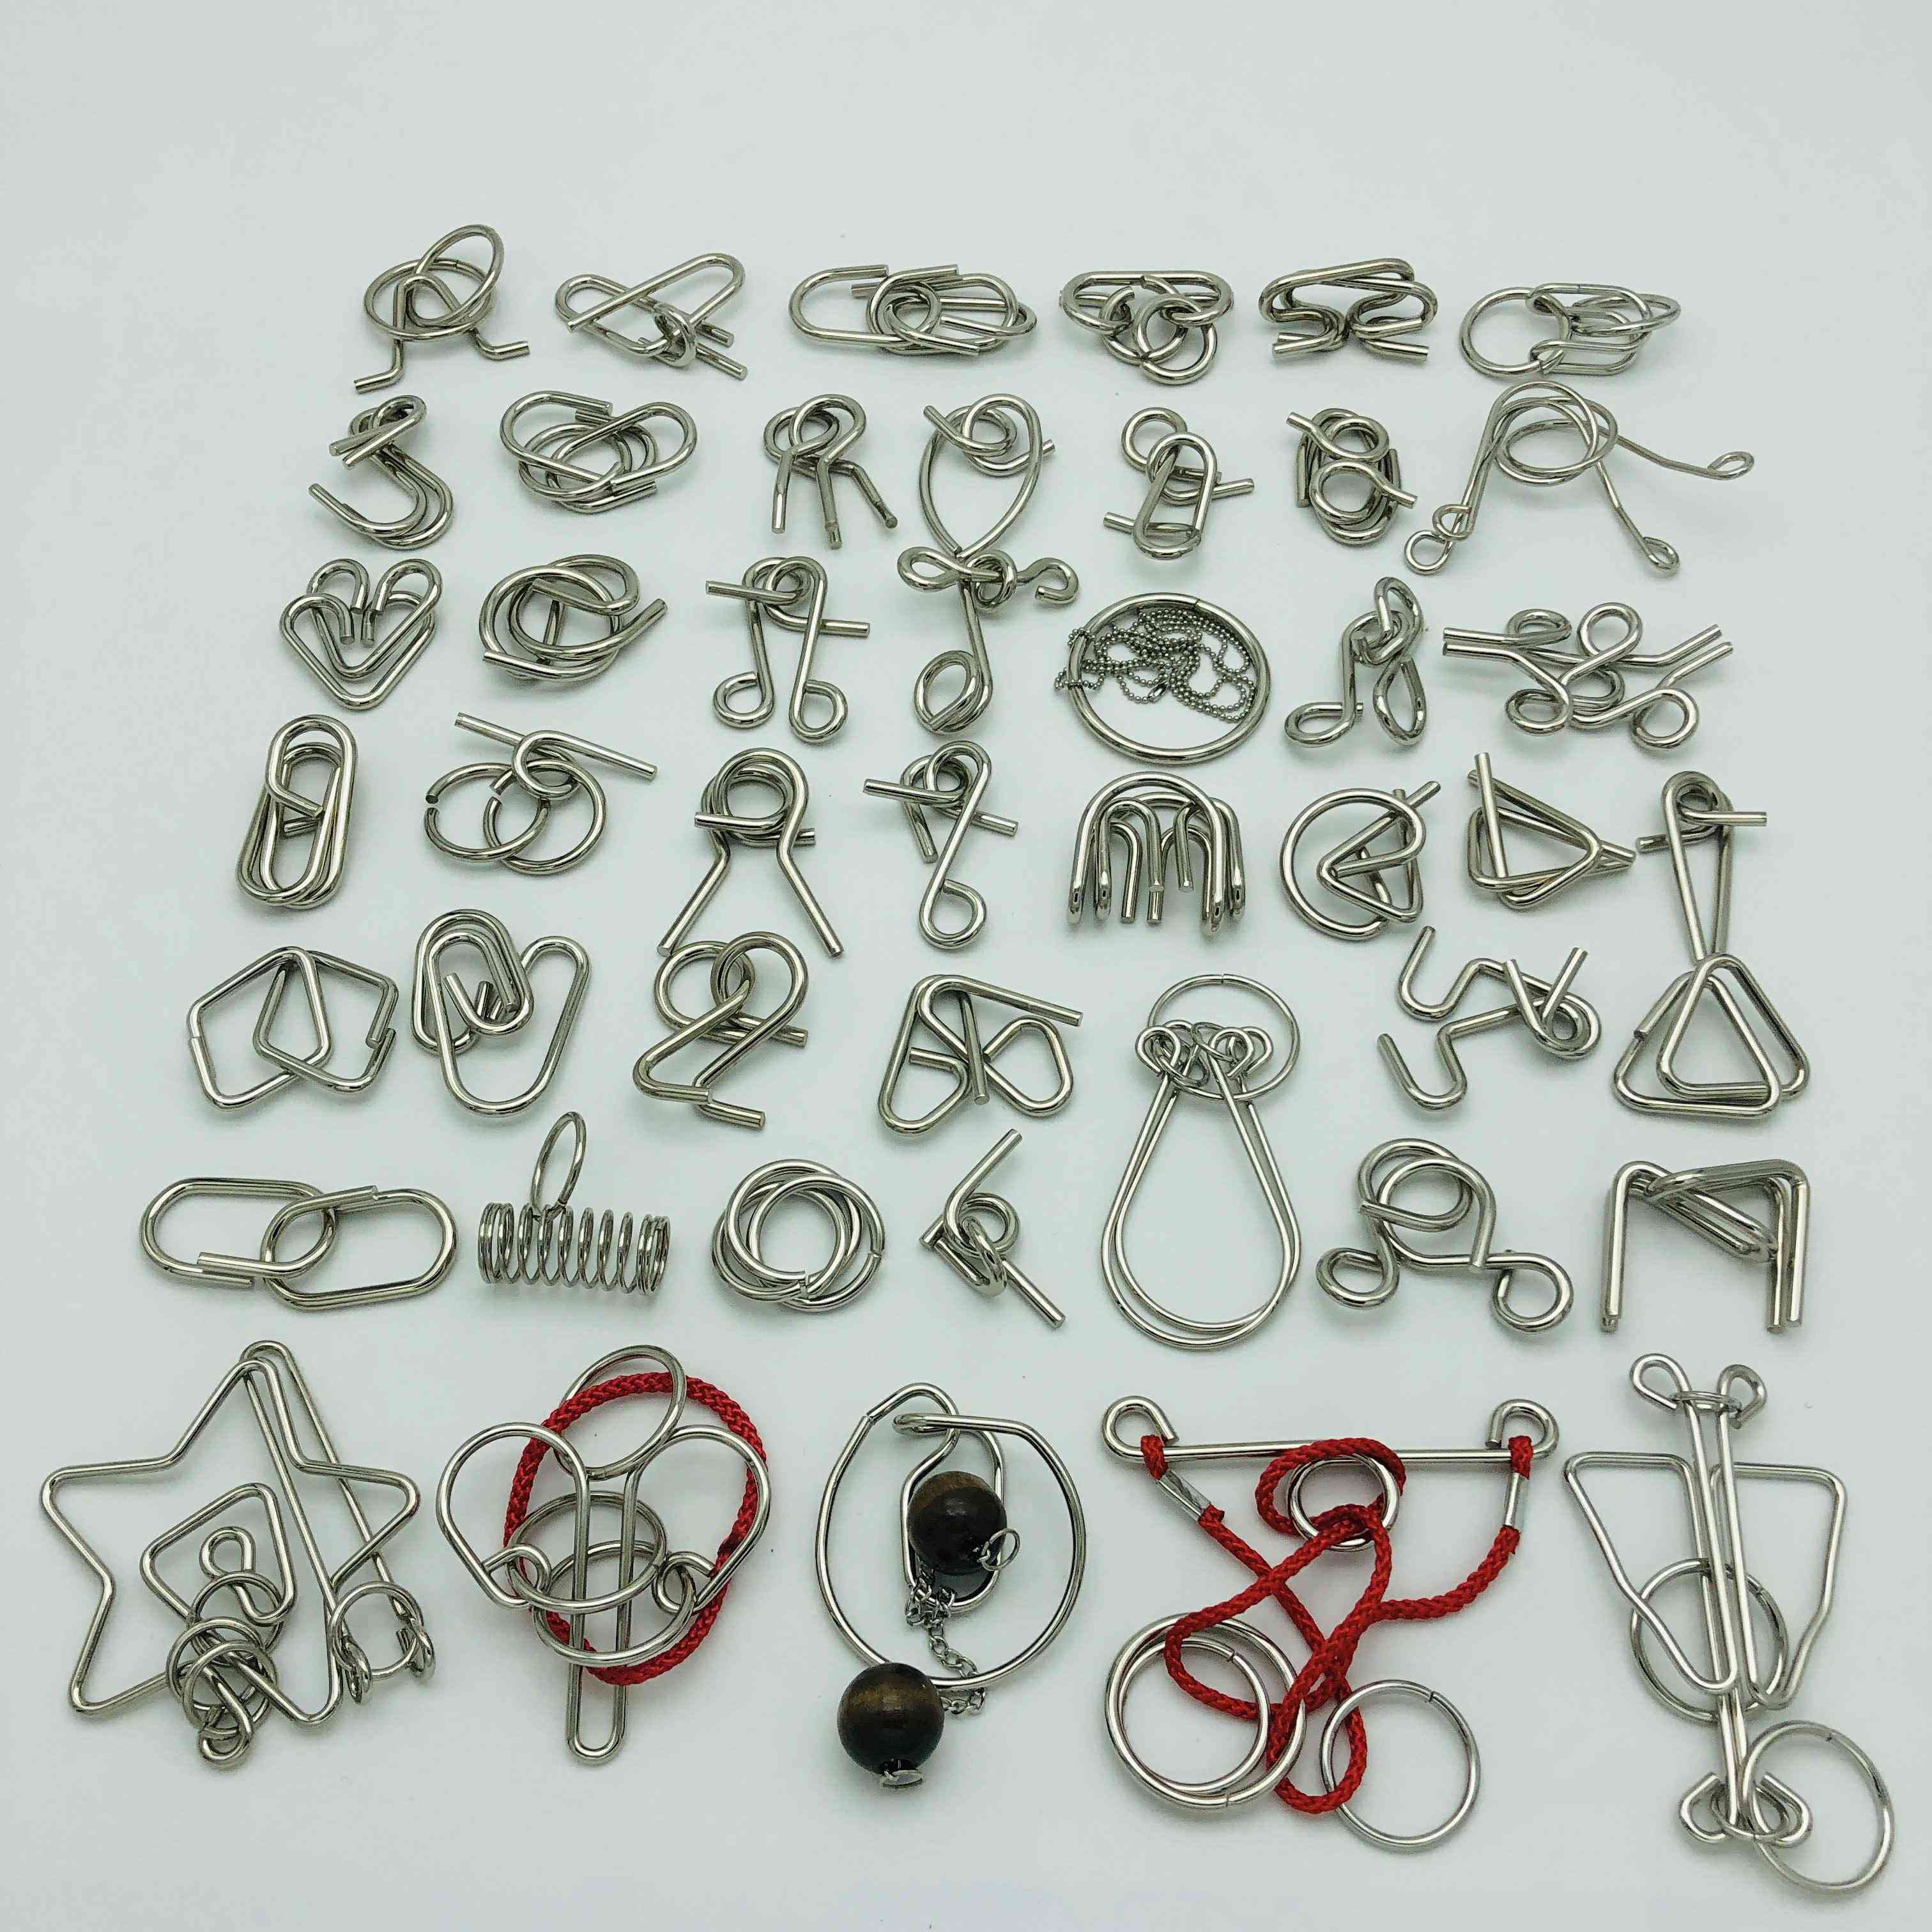 Metal Puzzle Mind Brain Teaser Magic Wire Rings Puzzles Game